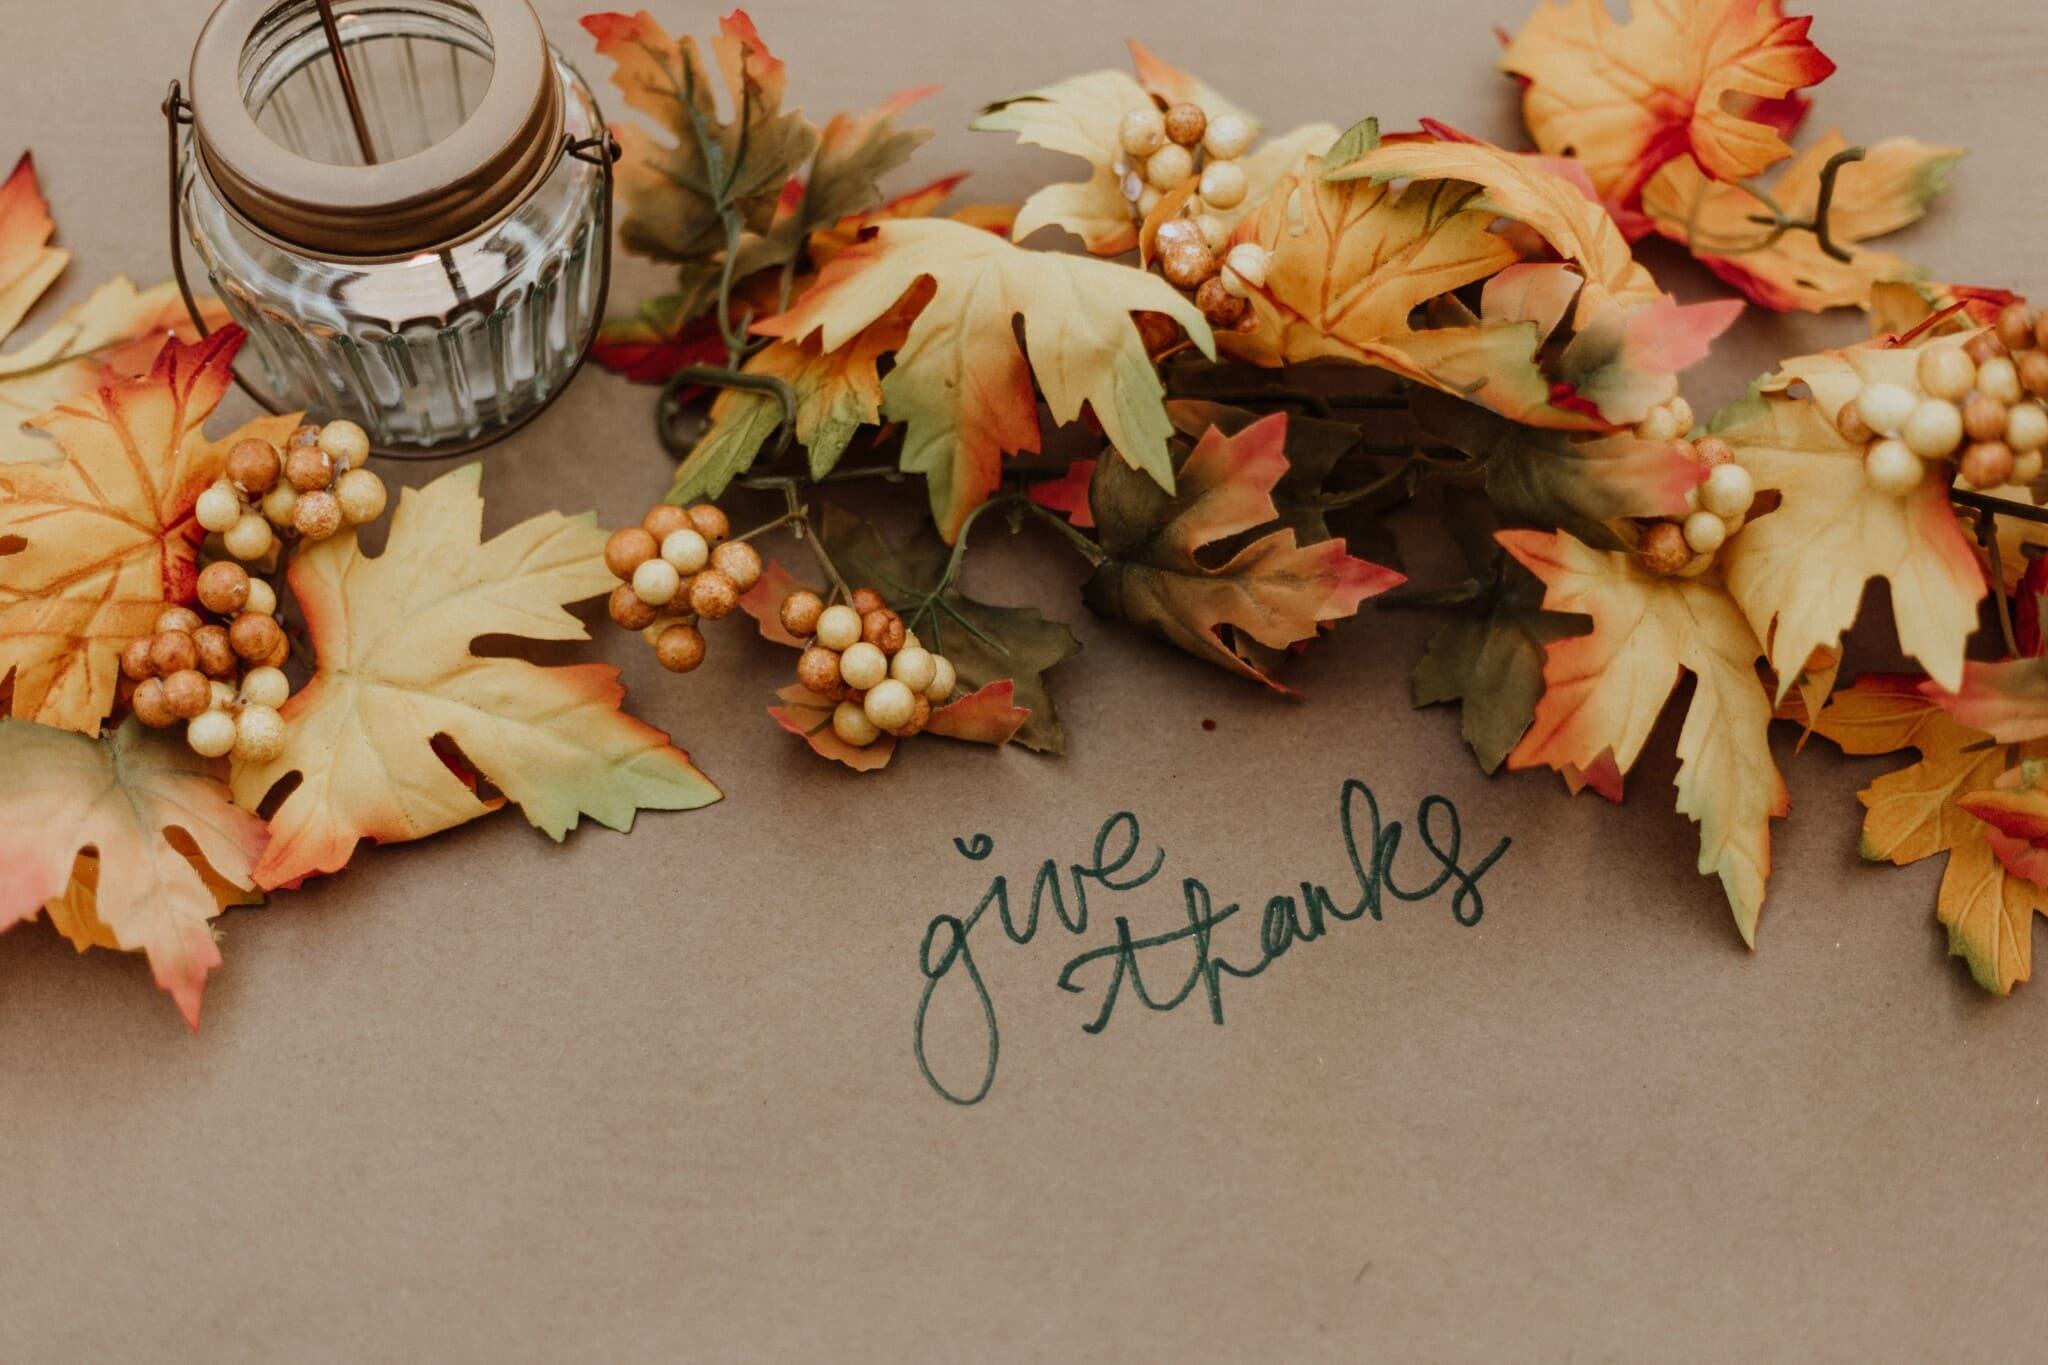 A collection of fall foliage with the message saying "give thanks."